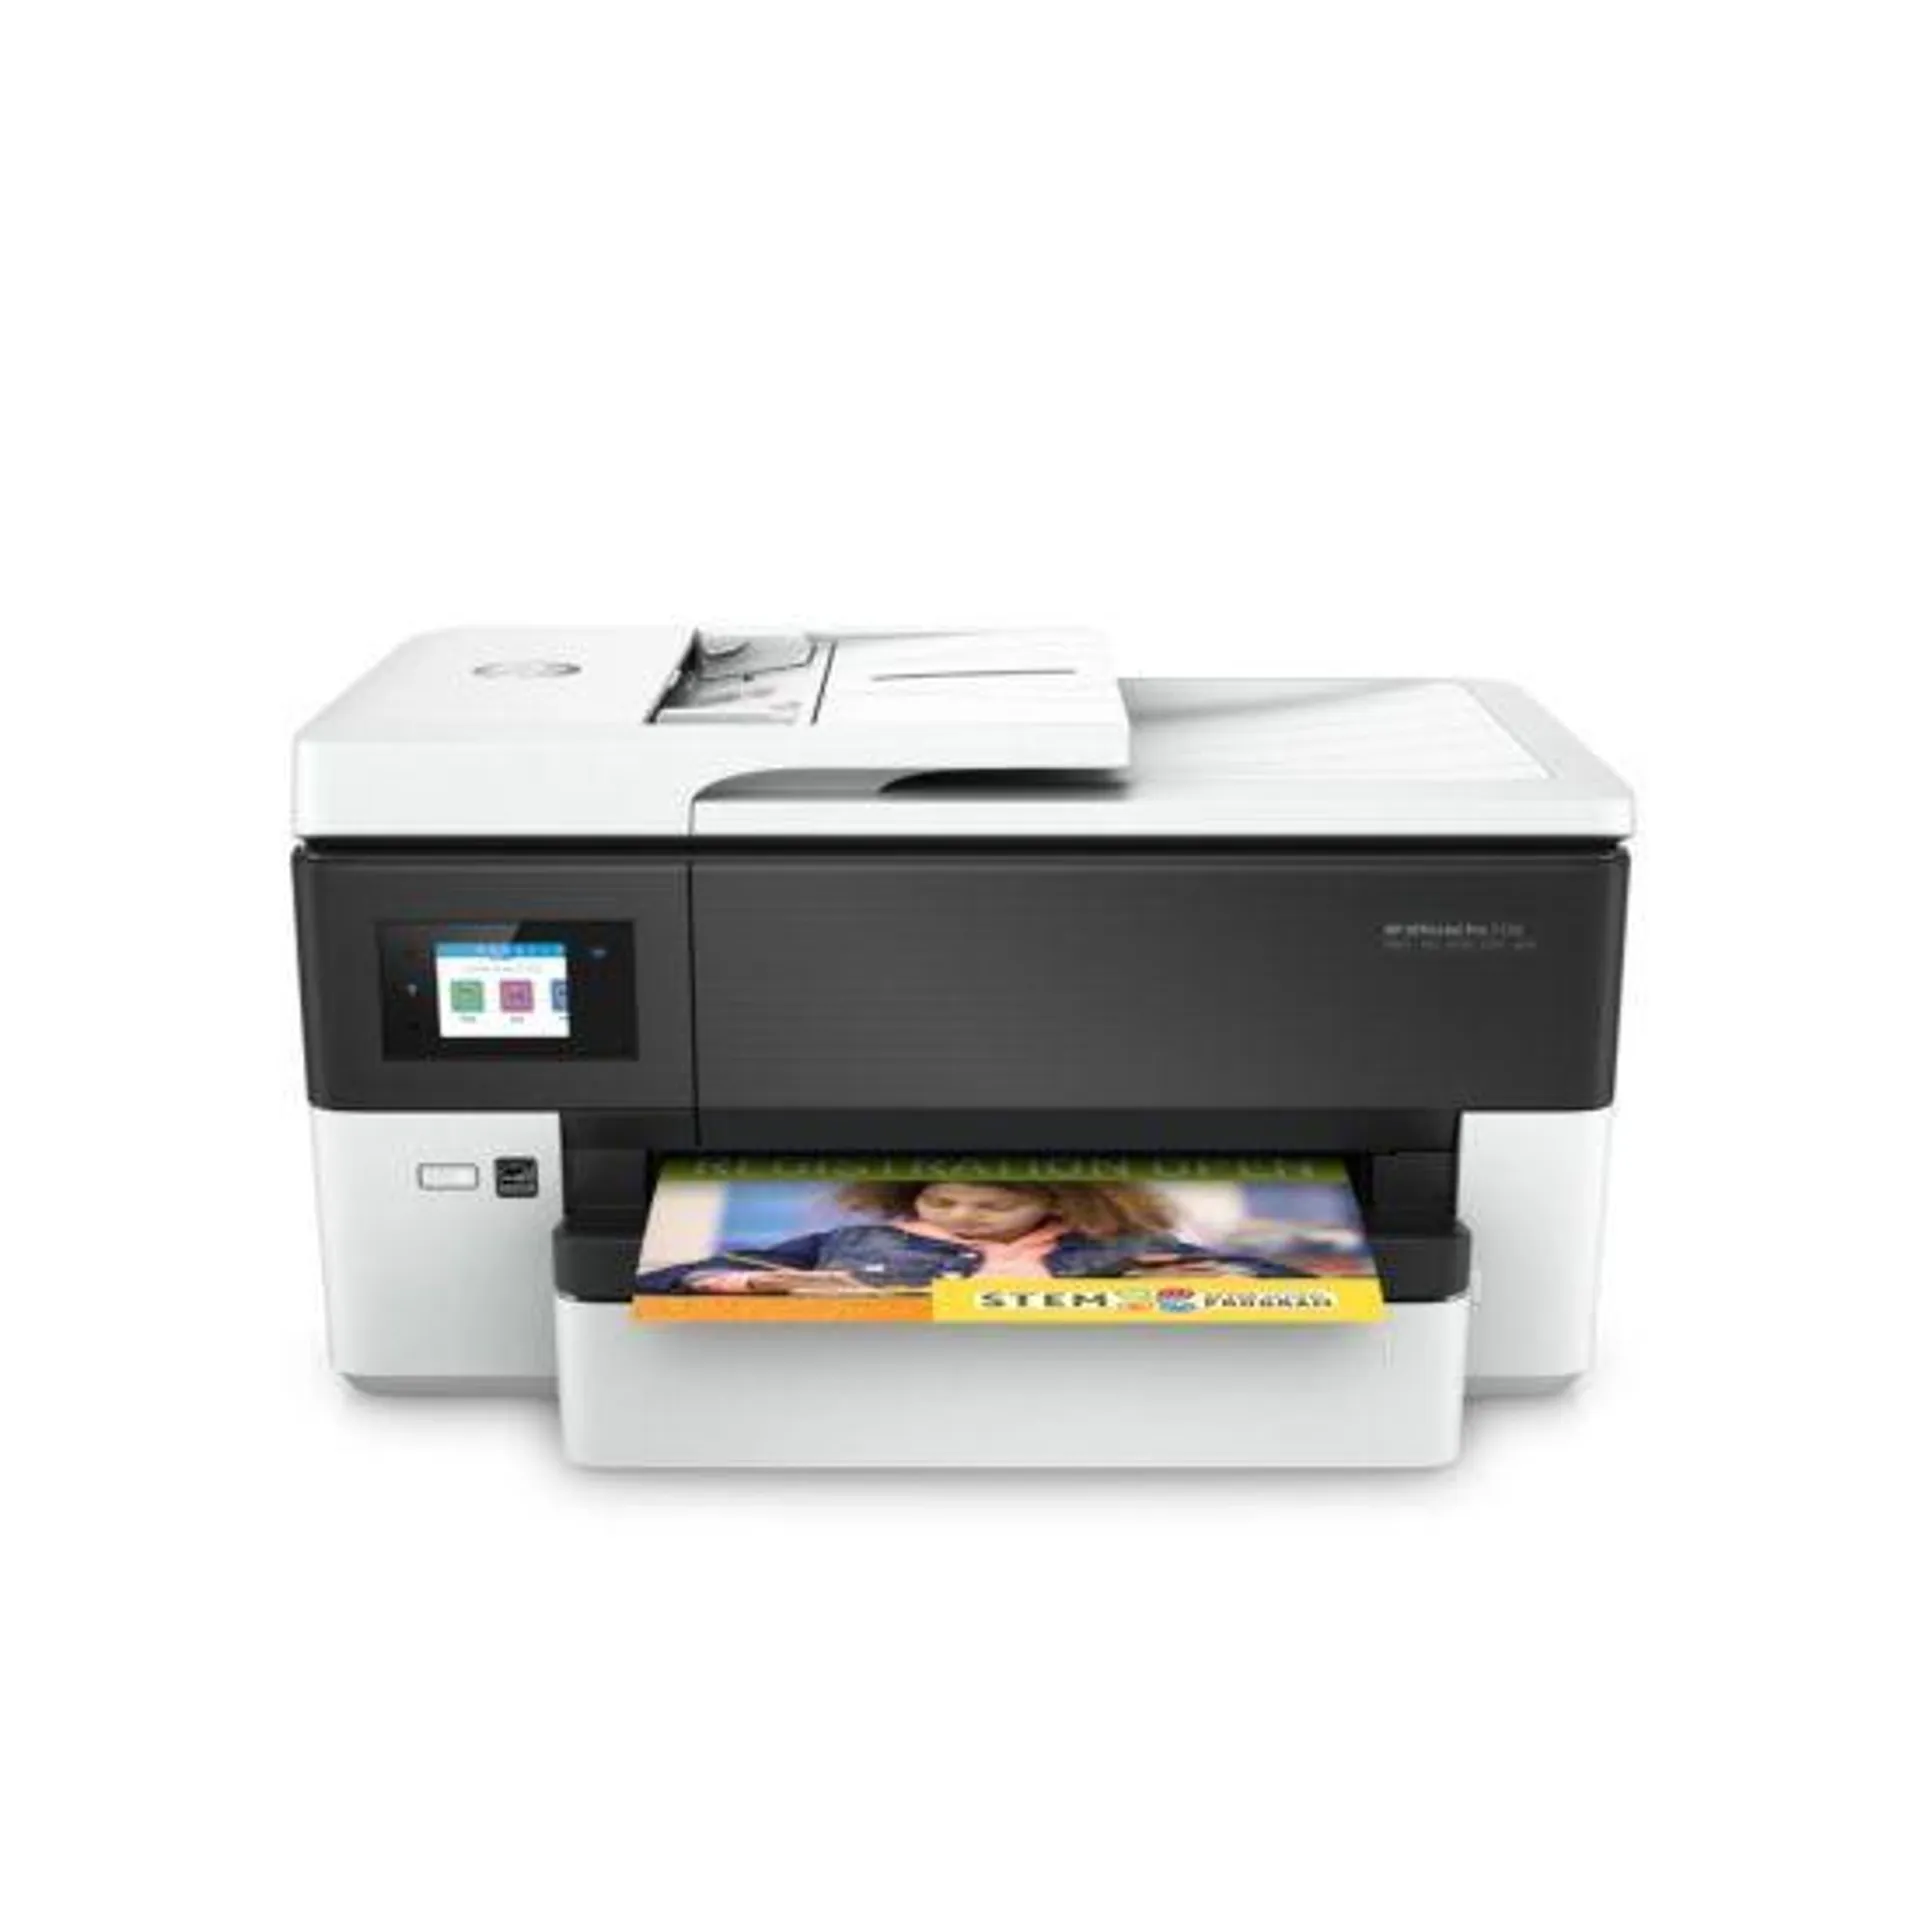 HP OfficeJet Pro 7720 All in One Wireless A3 Inkjet Printer with Fax